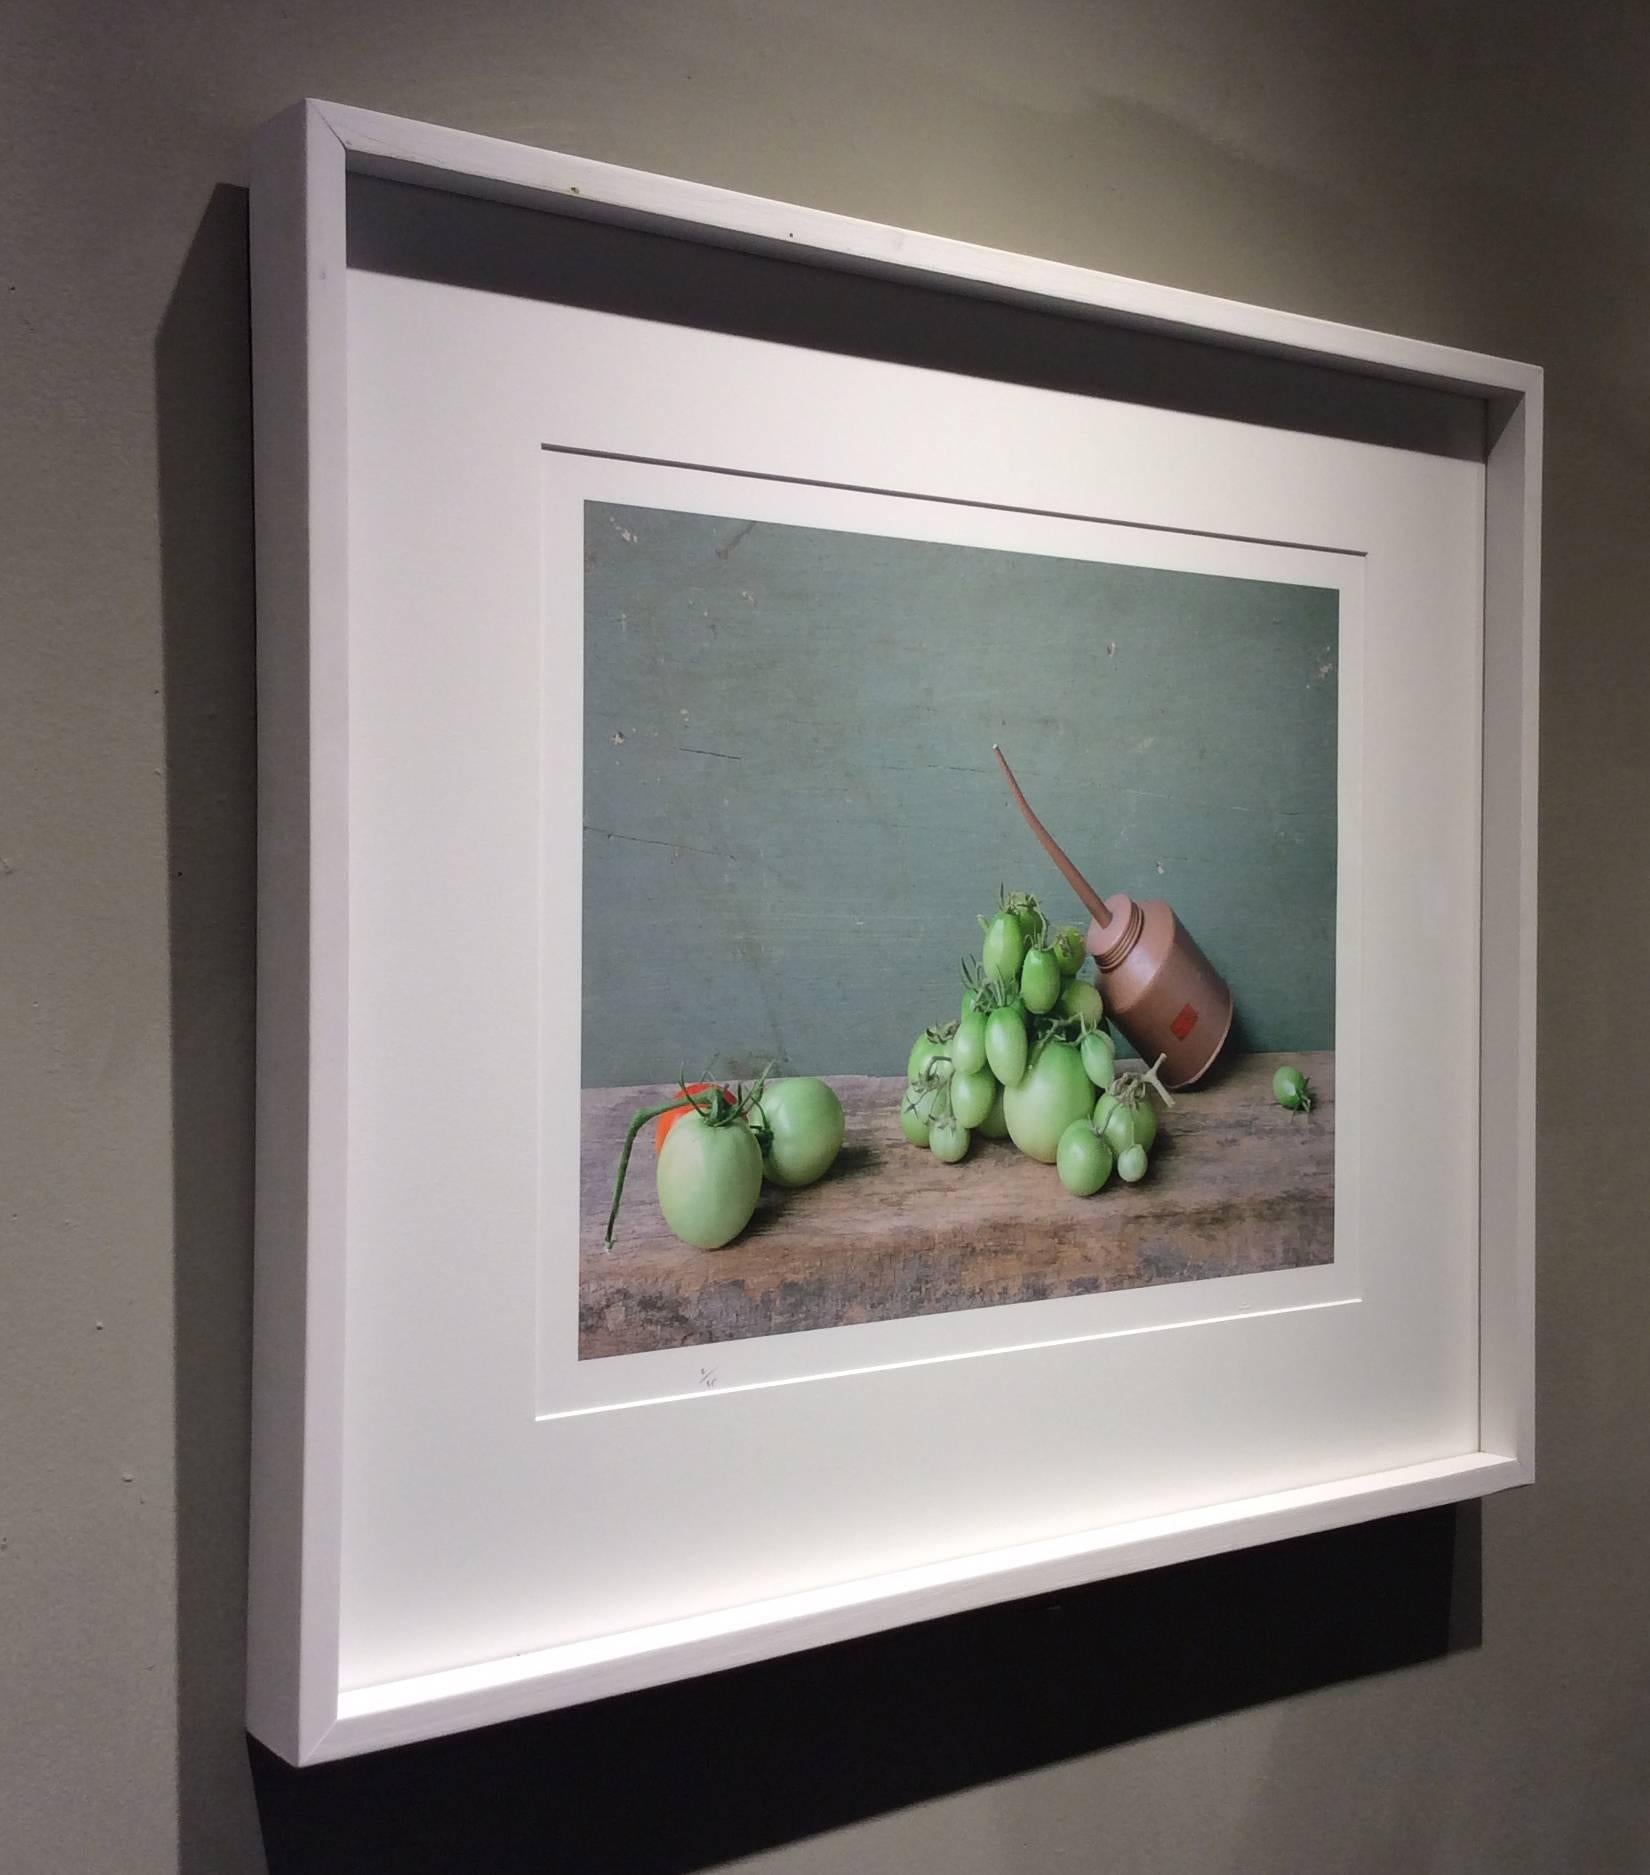 Green Tomatoes & Oil Can: Modern Still Life Photograph of Food & Objects, Framed - Gray Color Photograph by David Halliday